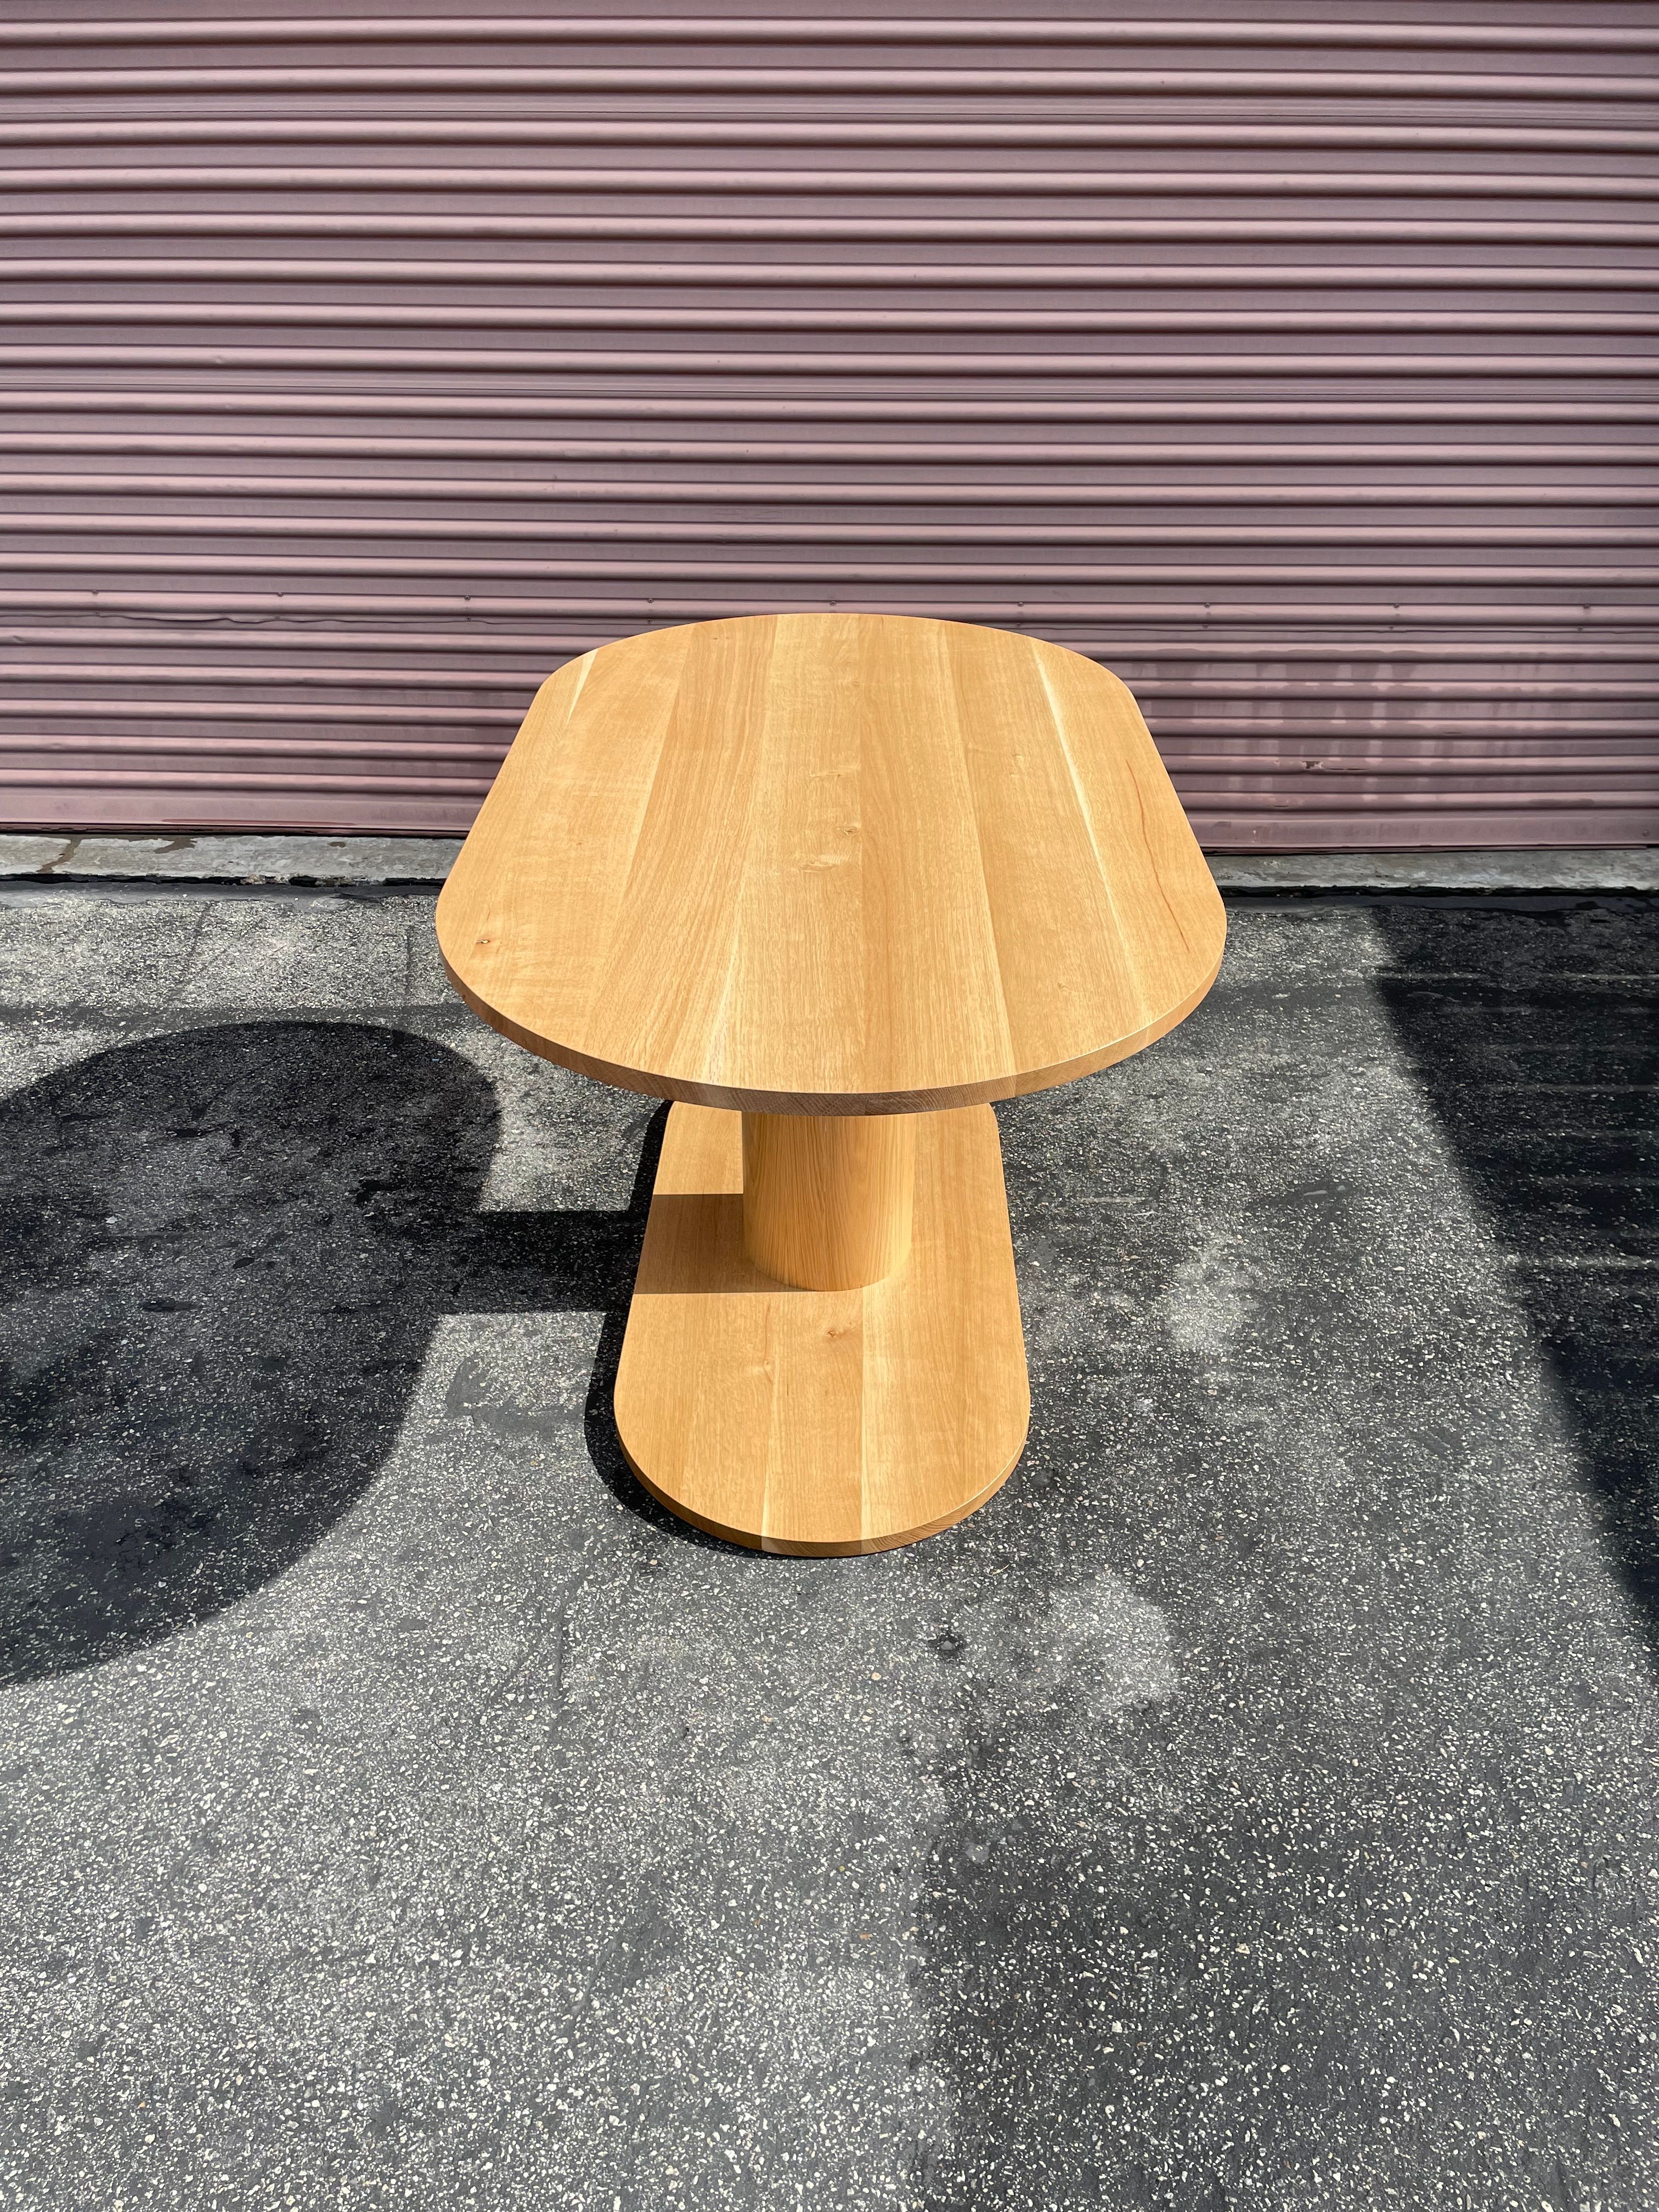  White Oak Dining Table - Frederick Tang Architecture product image 4